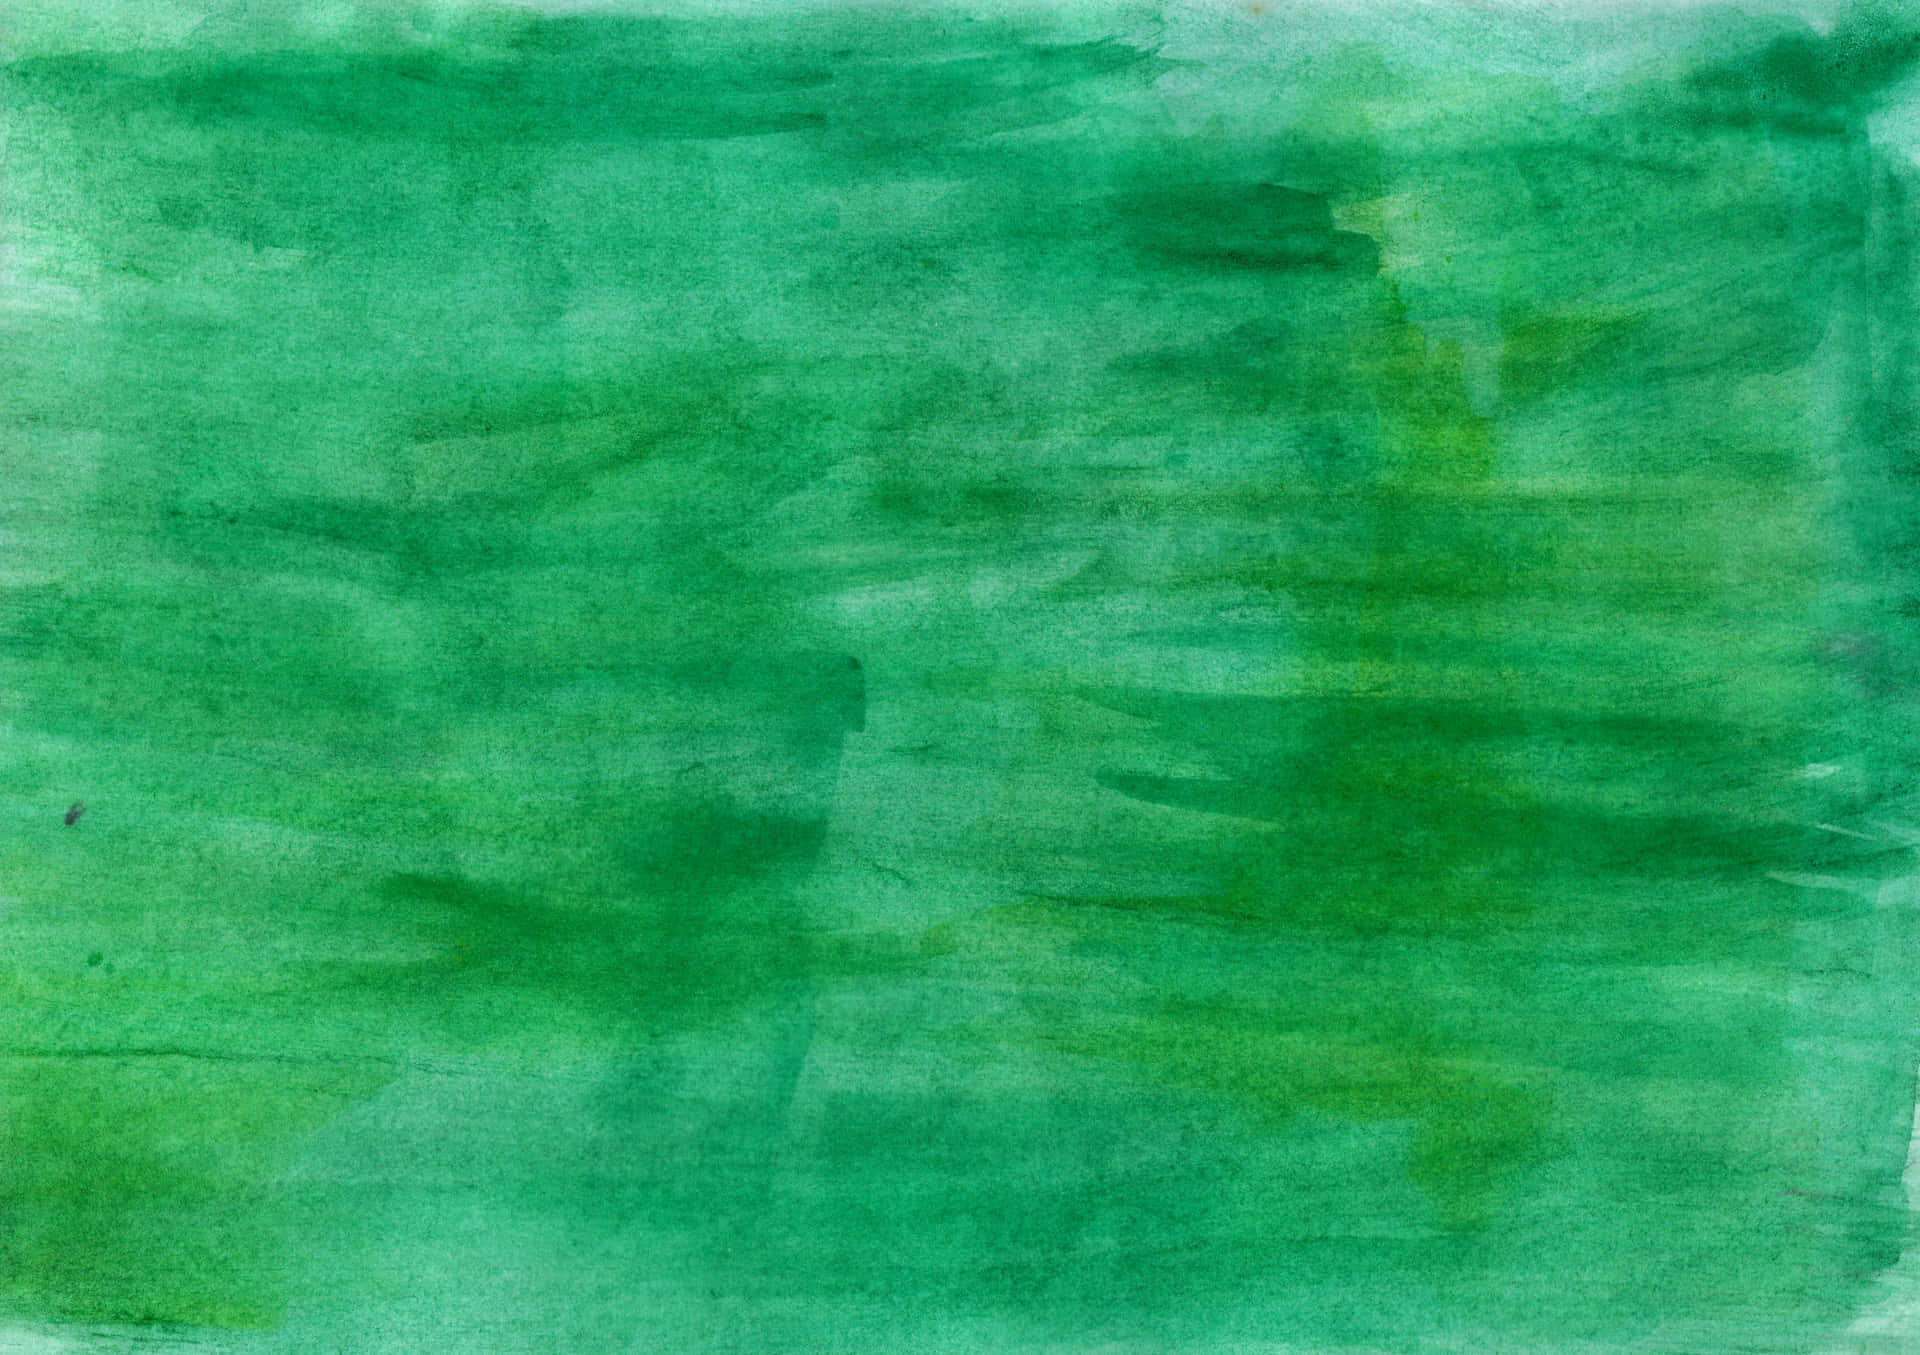 Green Watercolor Background With A Green Brush Stroke